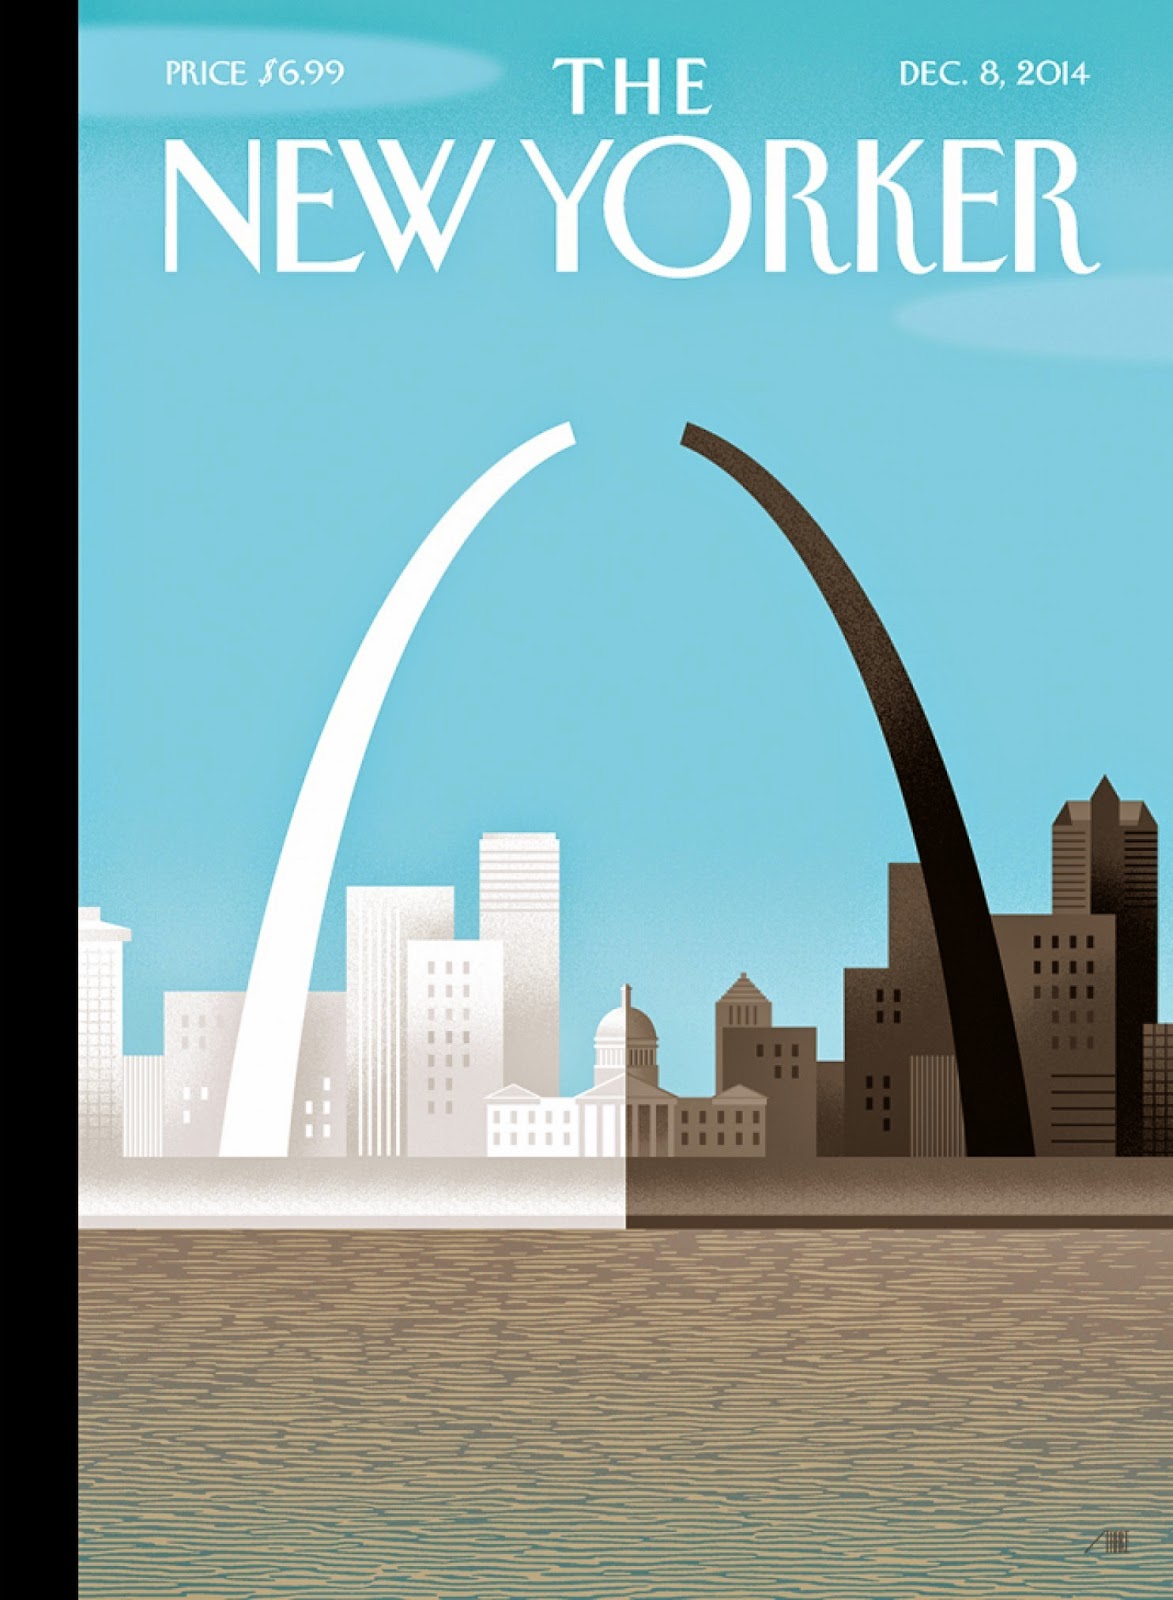 Nicholas Stix, Uncensored: Plagiarism Scandal at The New Yorker! Leftwing Cartoonist Bob Staake ...